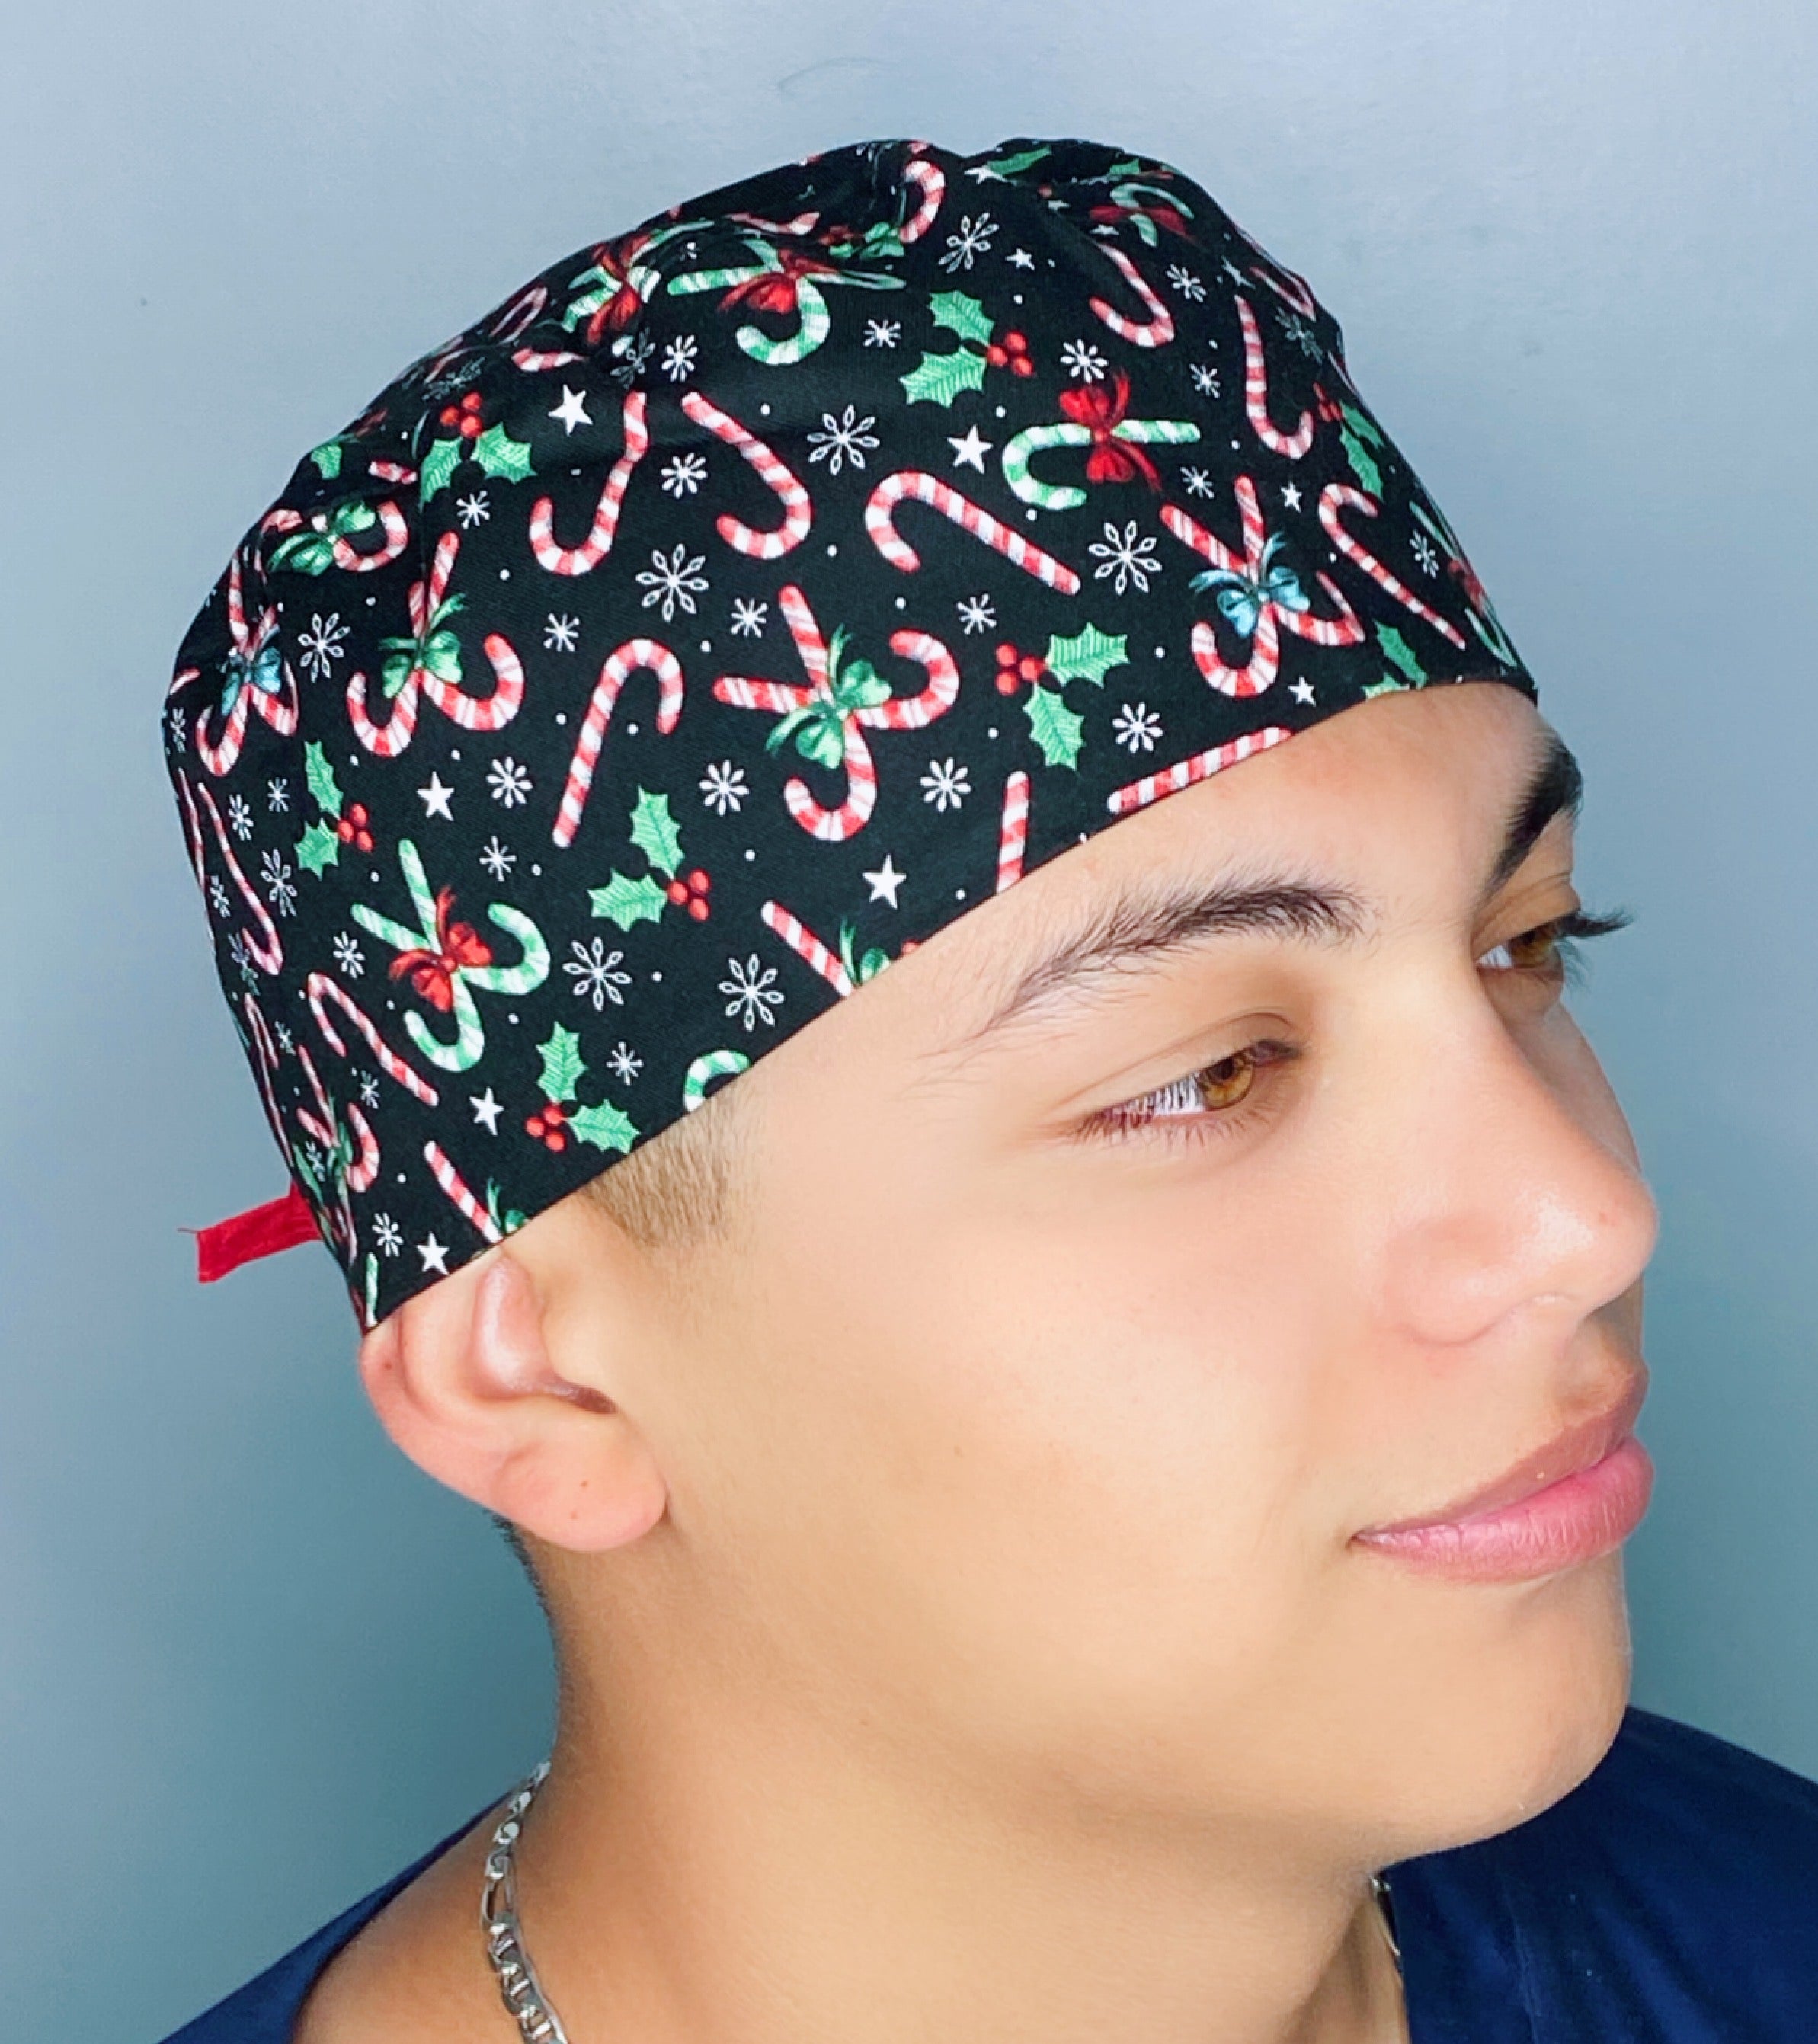 Candy Canes & Peppermints Christmas/Winter themed Unisex Holiday Scrub Cap